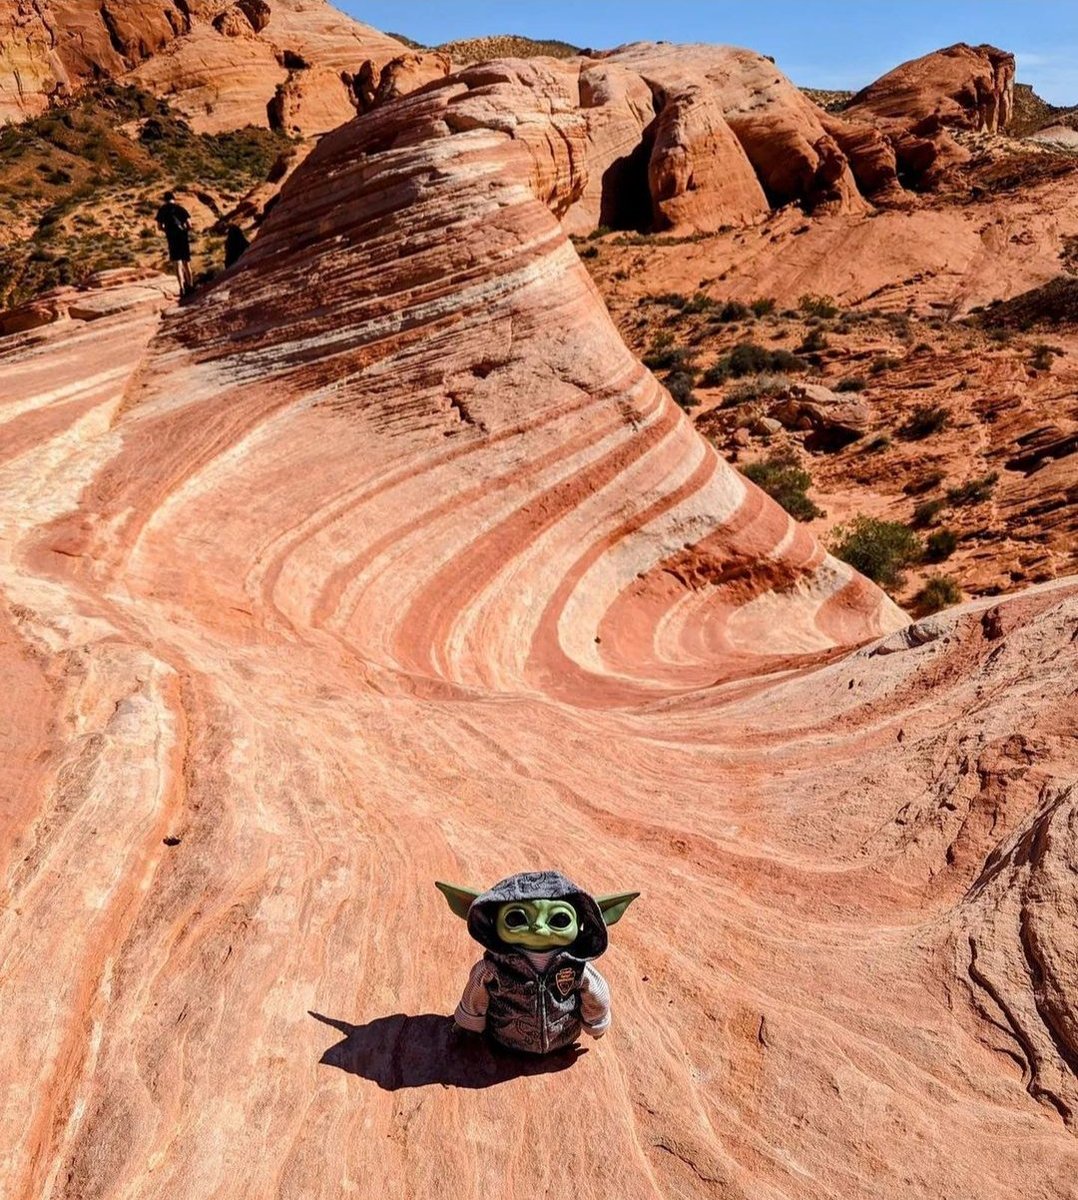 May the 4th be with you 🤣
#valleyoffire
#MayThe4thBeWithYou 
#StarWarsDay